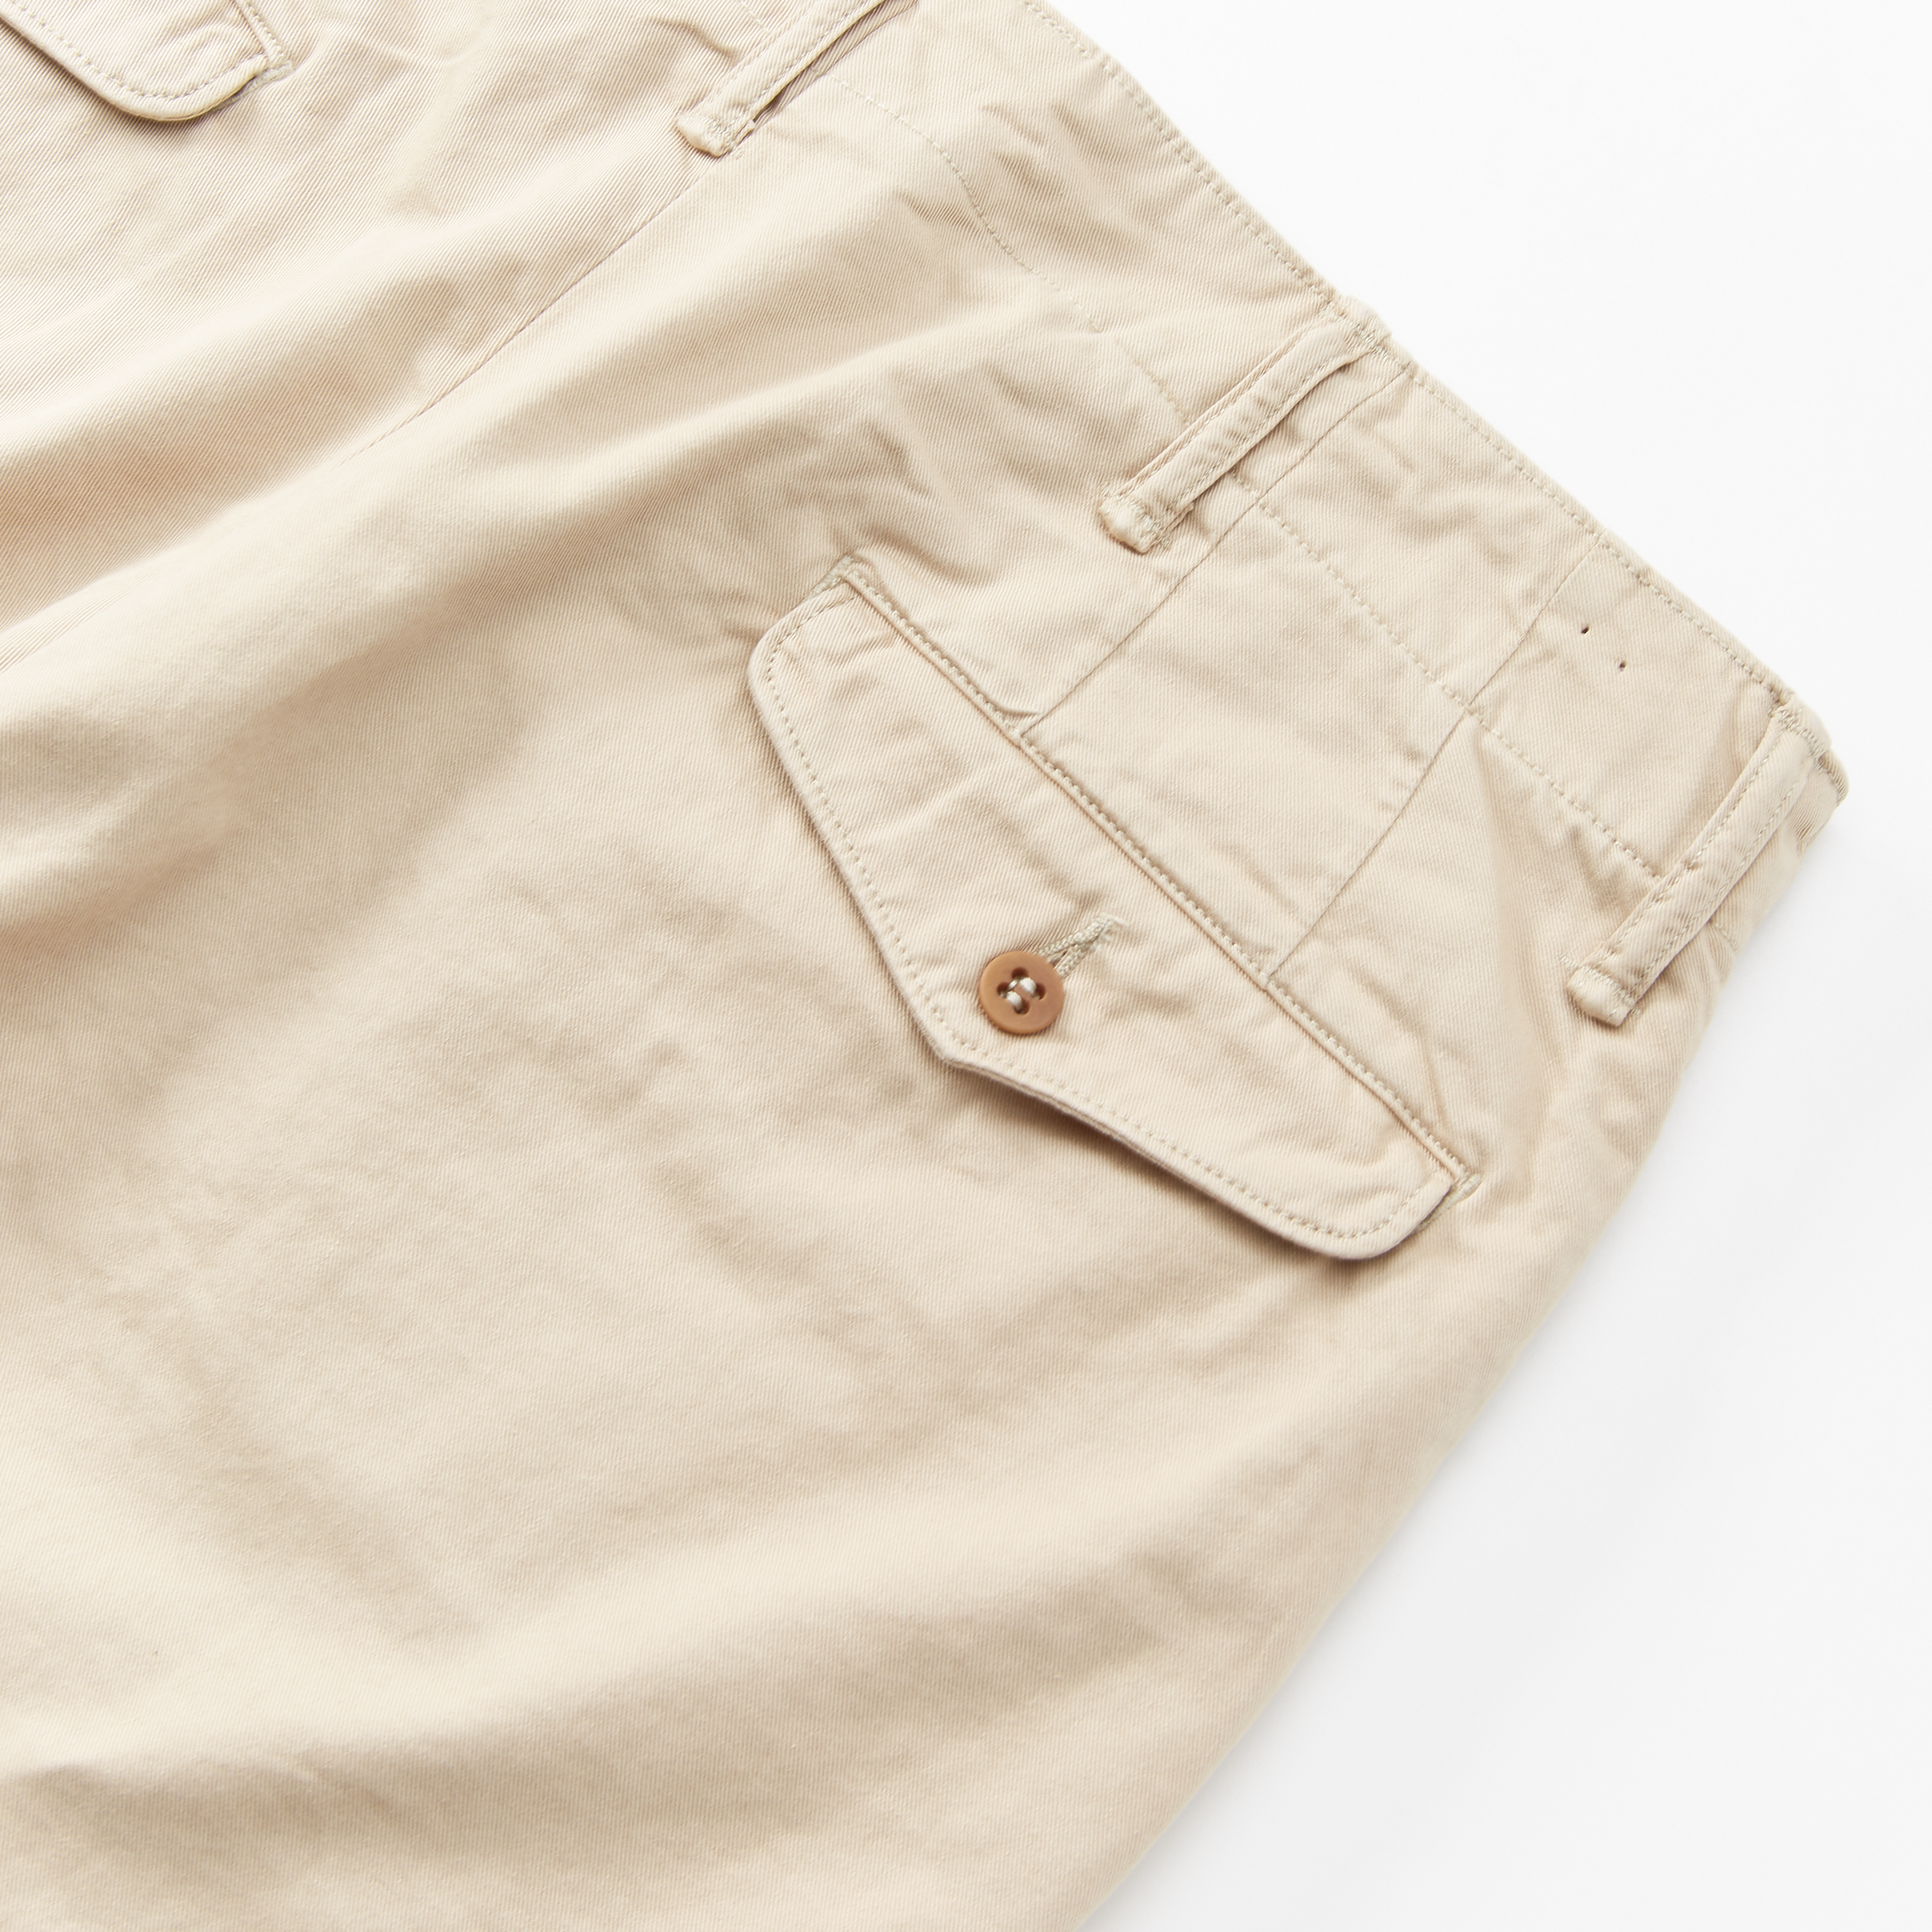 RRL Cotton Twill Officer's Chino - Stone | Casual Pants | Huckberry